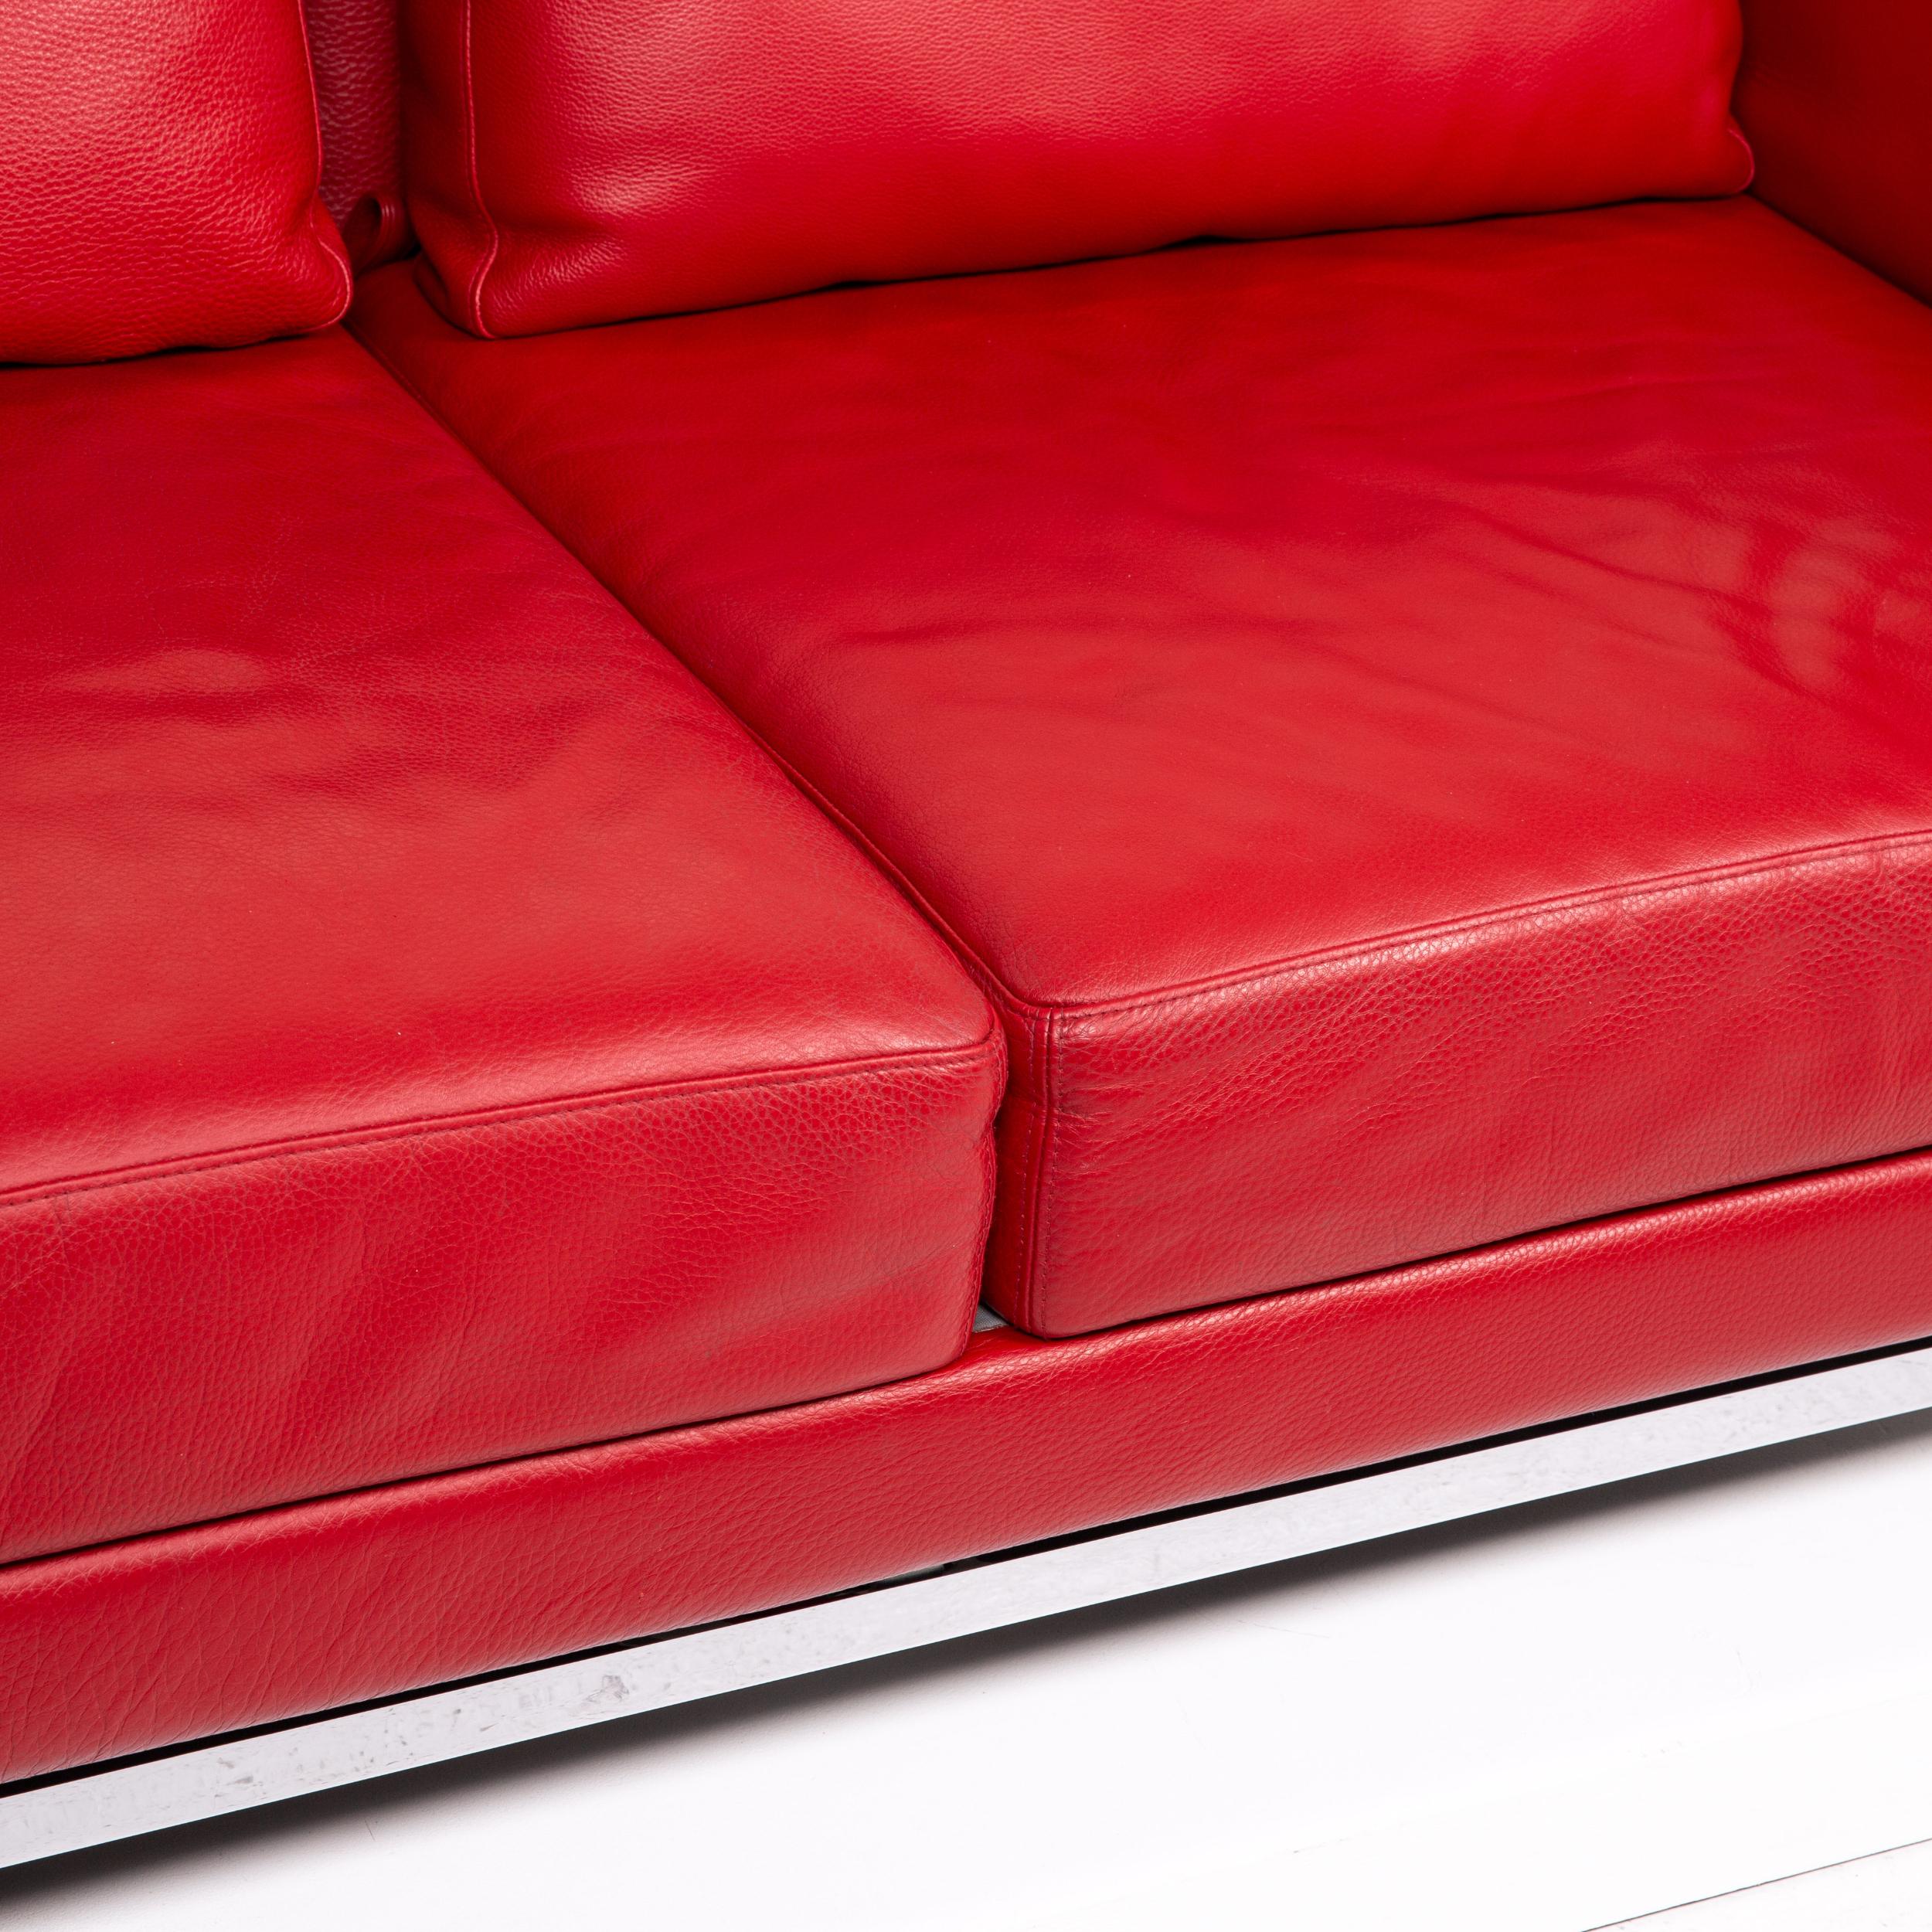 Modern Brühl & Sippold Moule Leather Sofa Red Two-Seat Function Sofa Bed Sleep For Sale